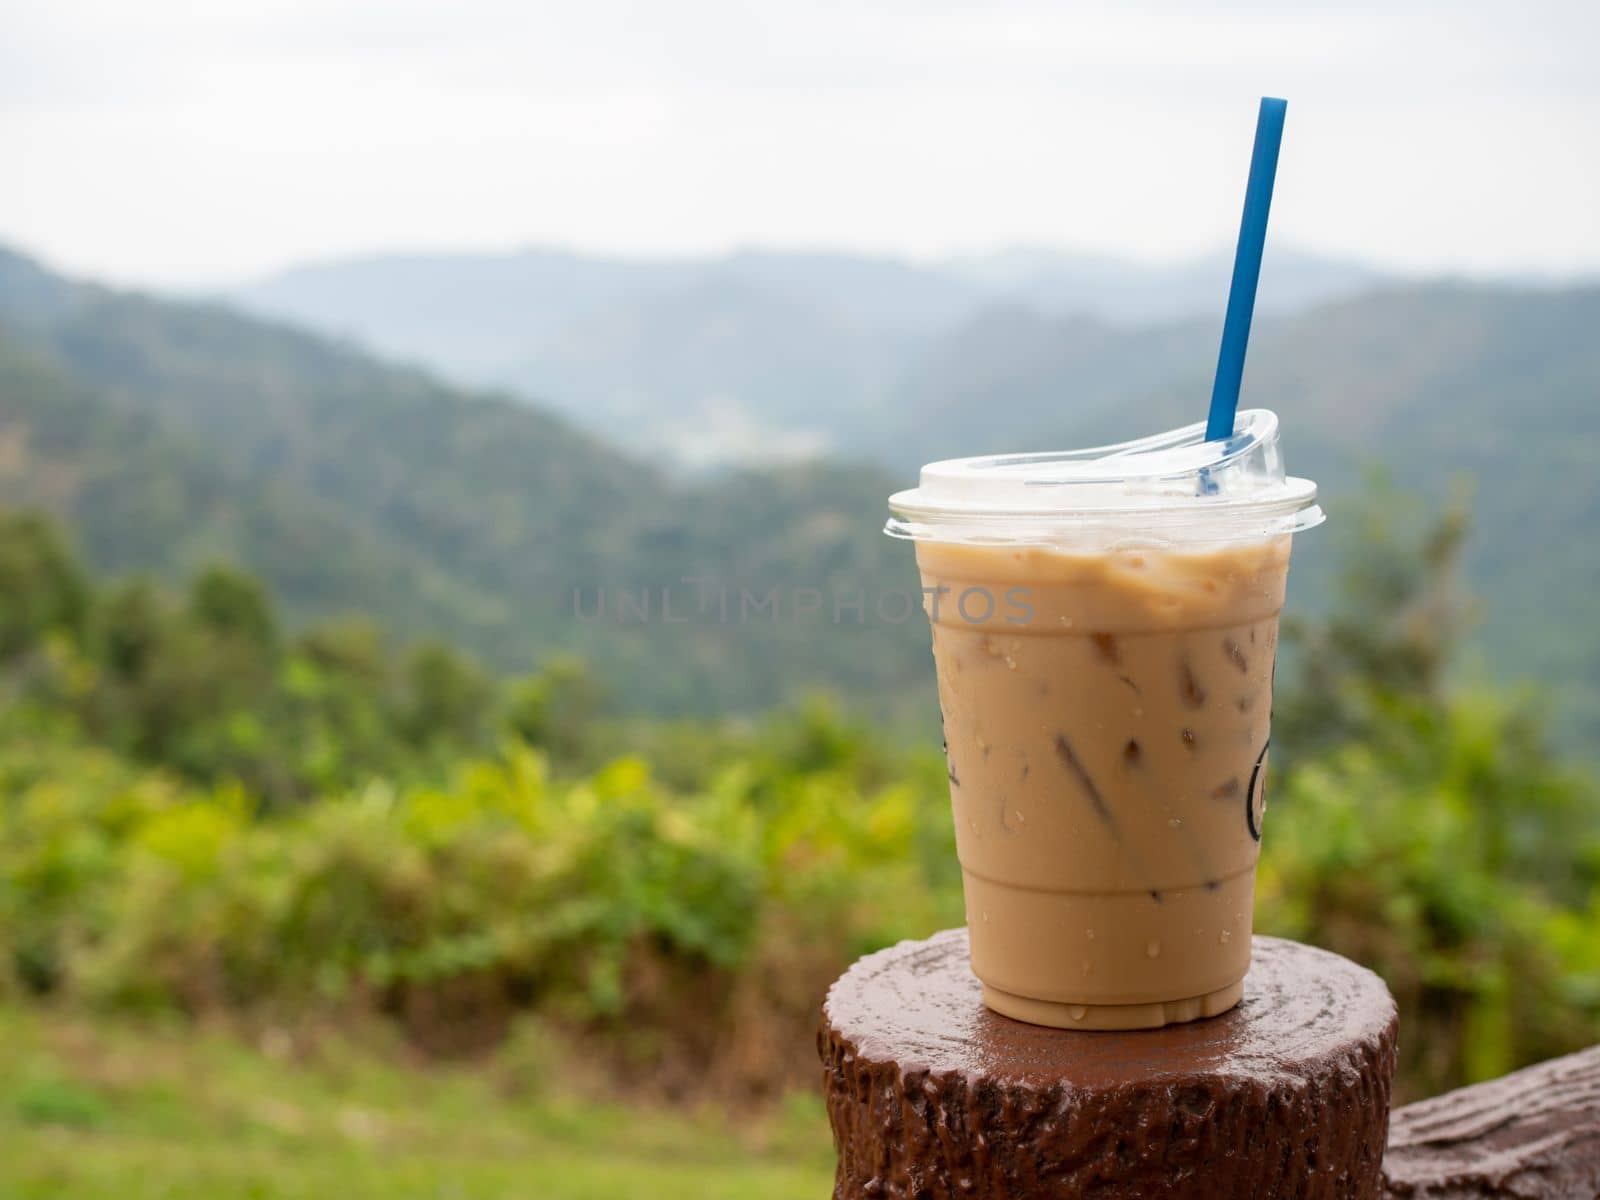 A glass of iced coffee is placed on the fence against a backdrop of mountains and sky. by Unimages2527